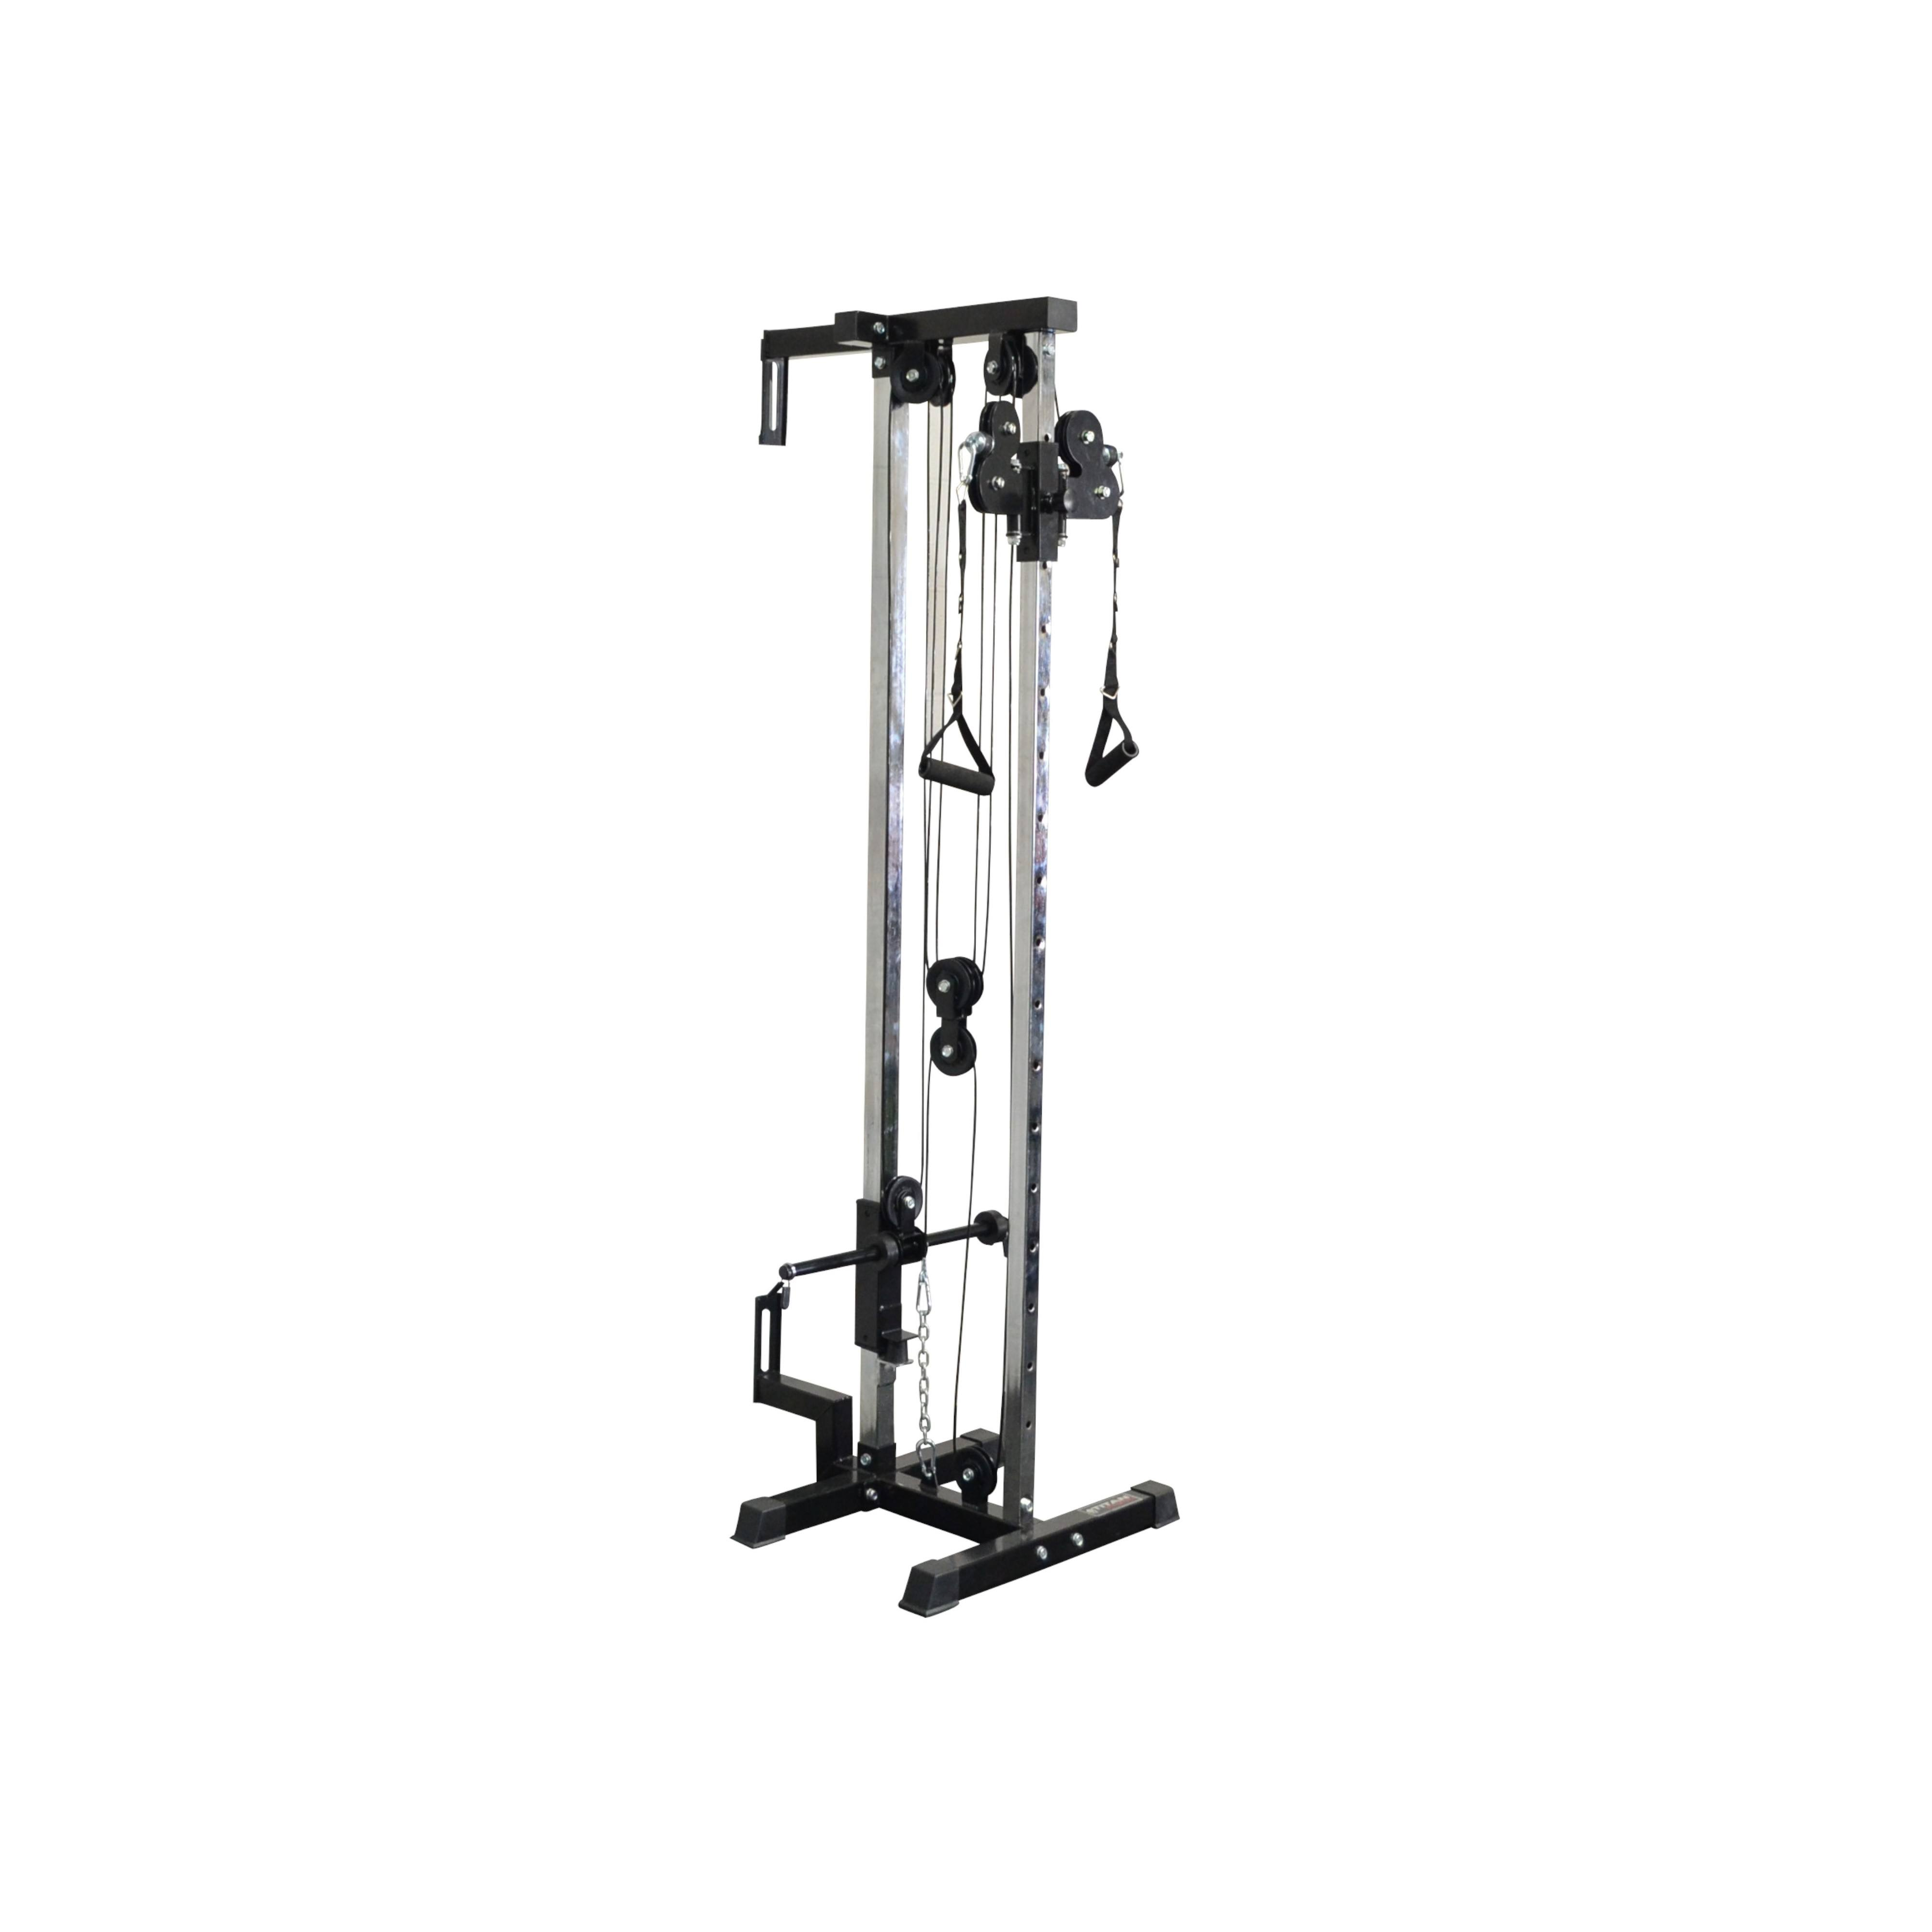 Titan Fitness Short Wall Mounted Pulley Tower V3